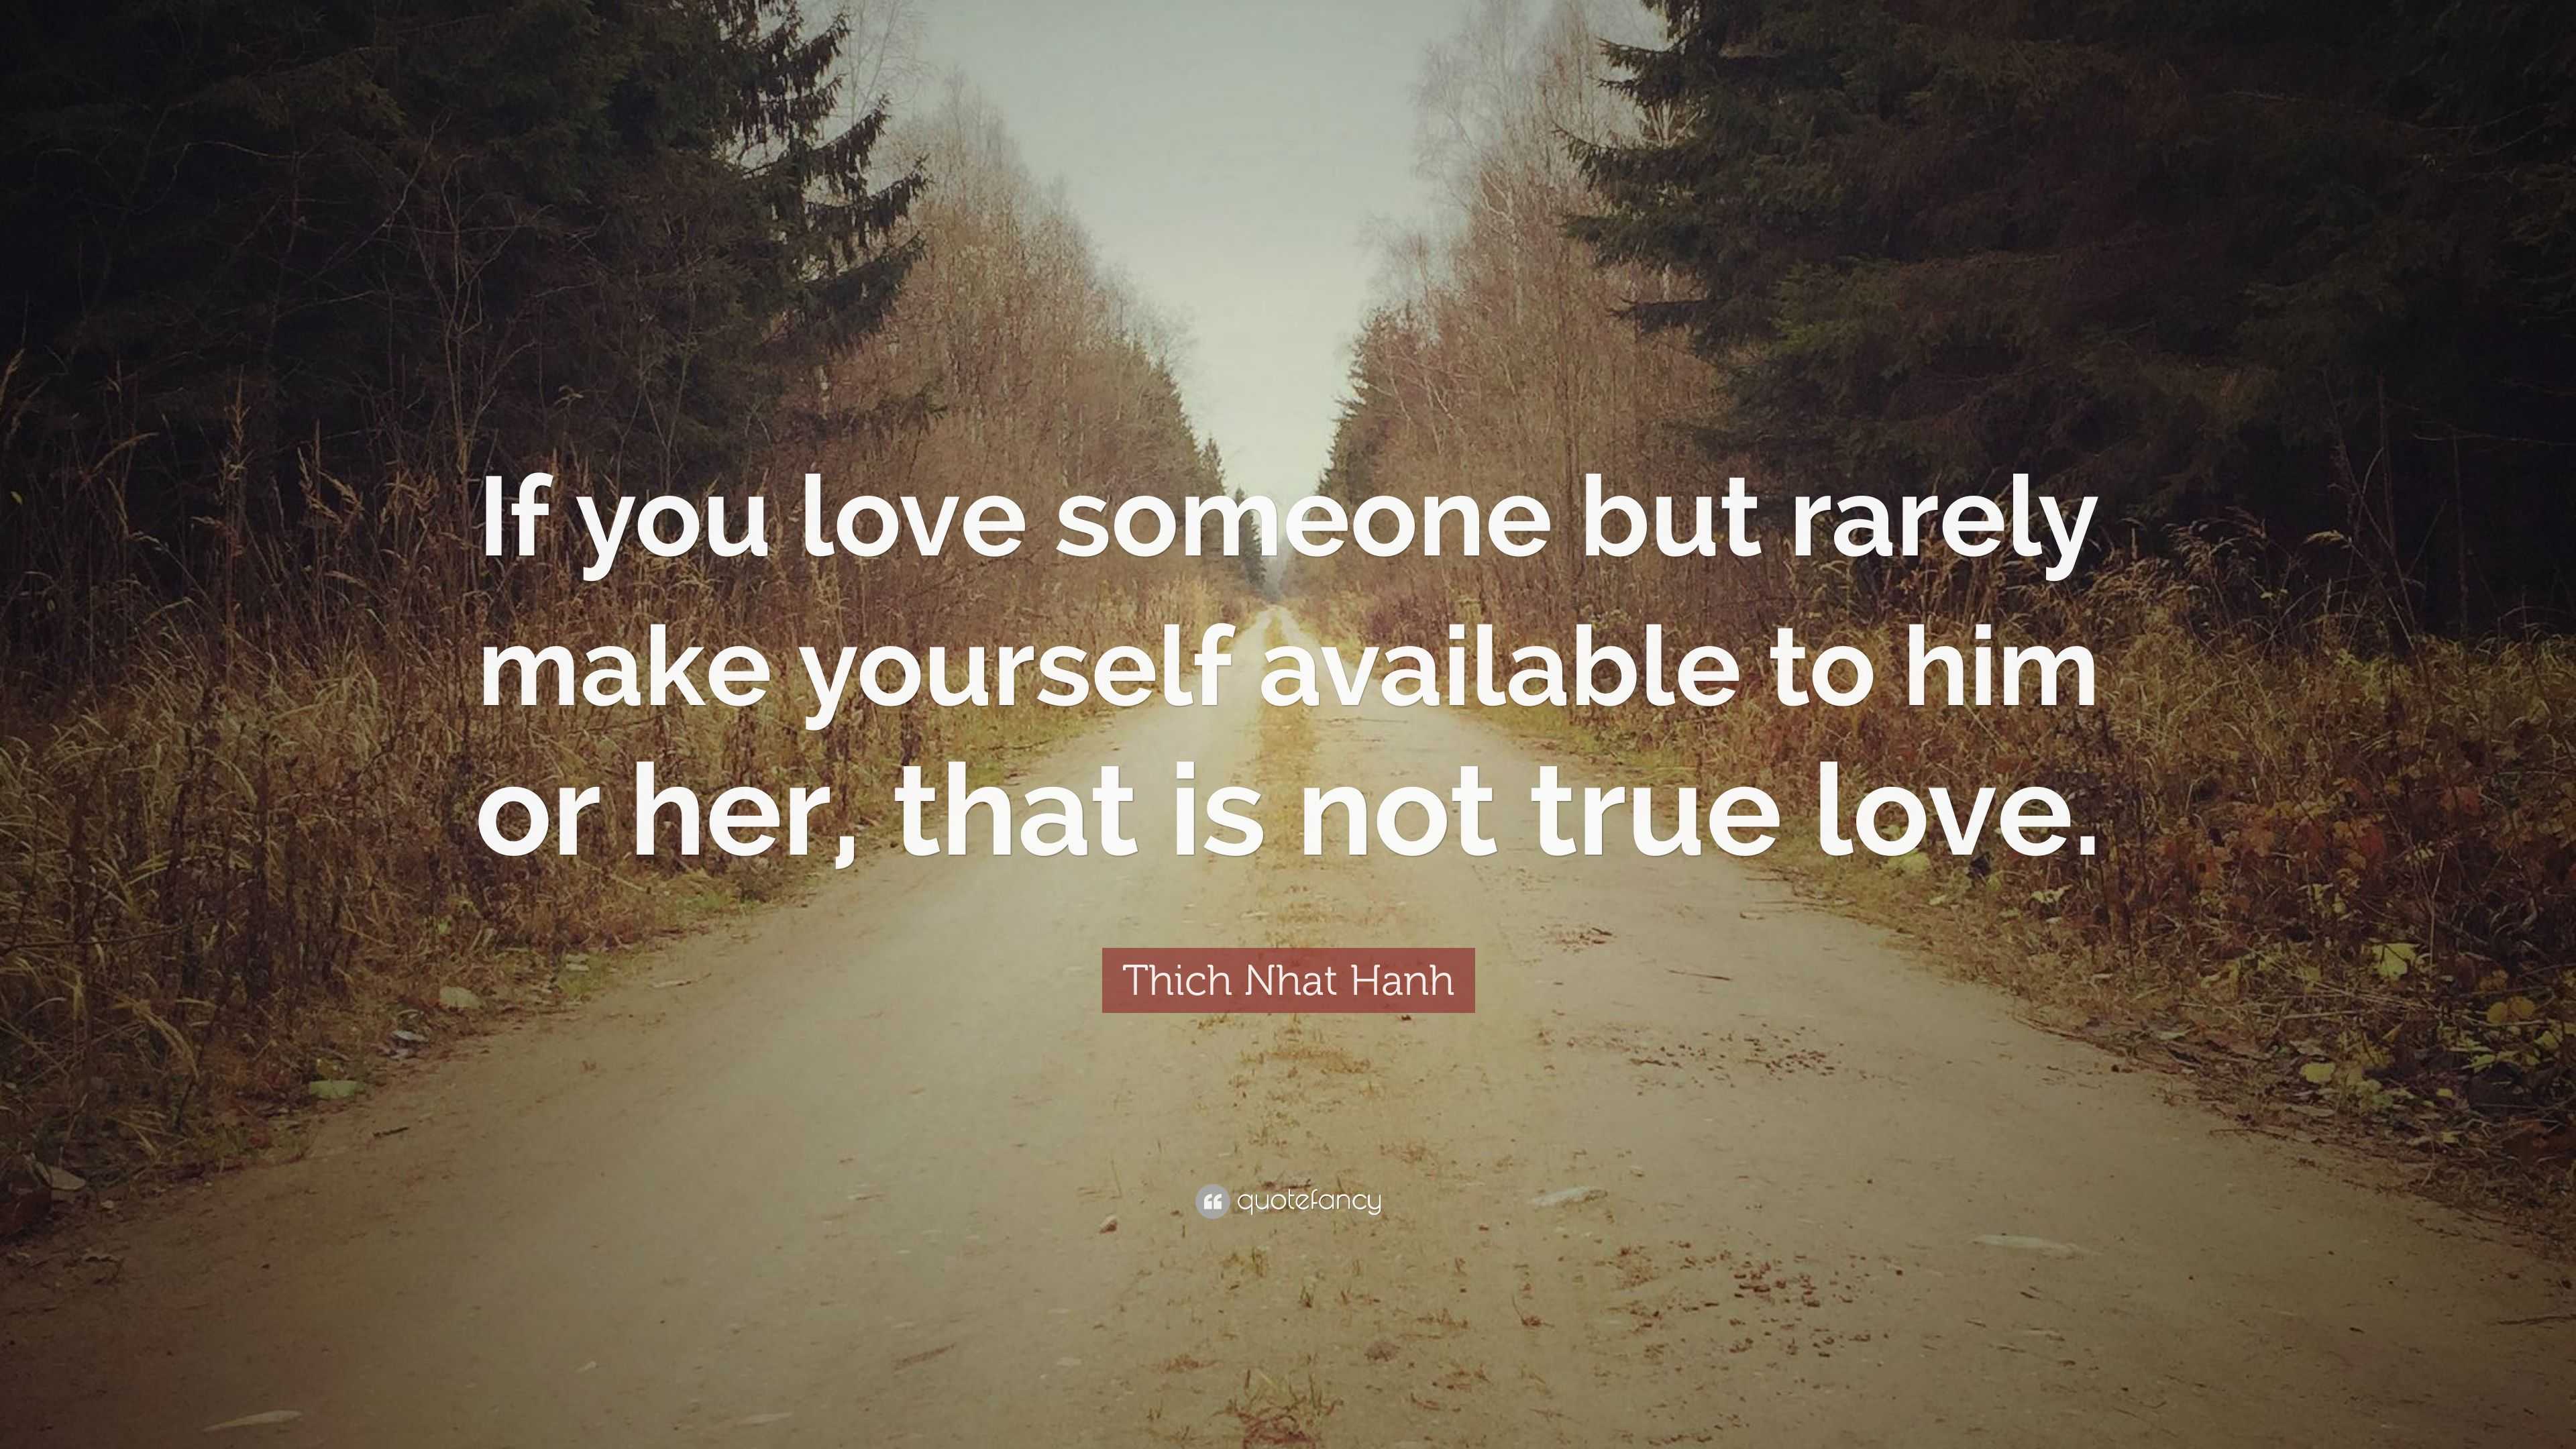 True Love by Thich Nhat Hanh